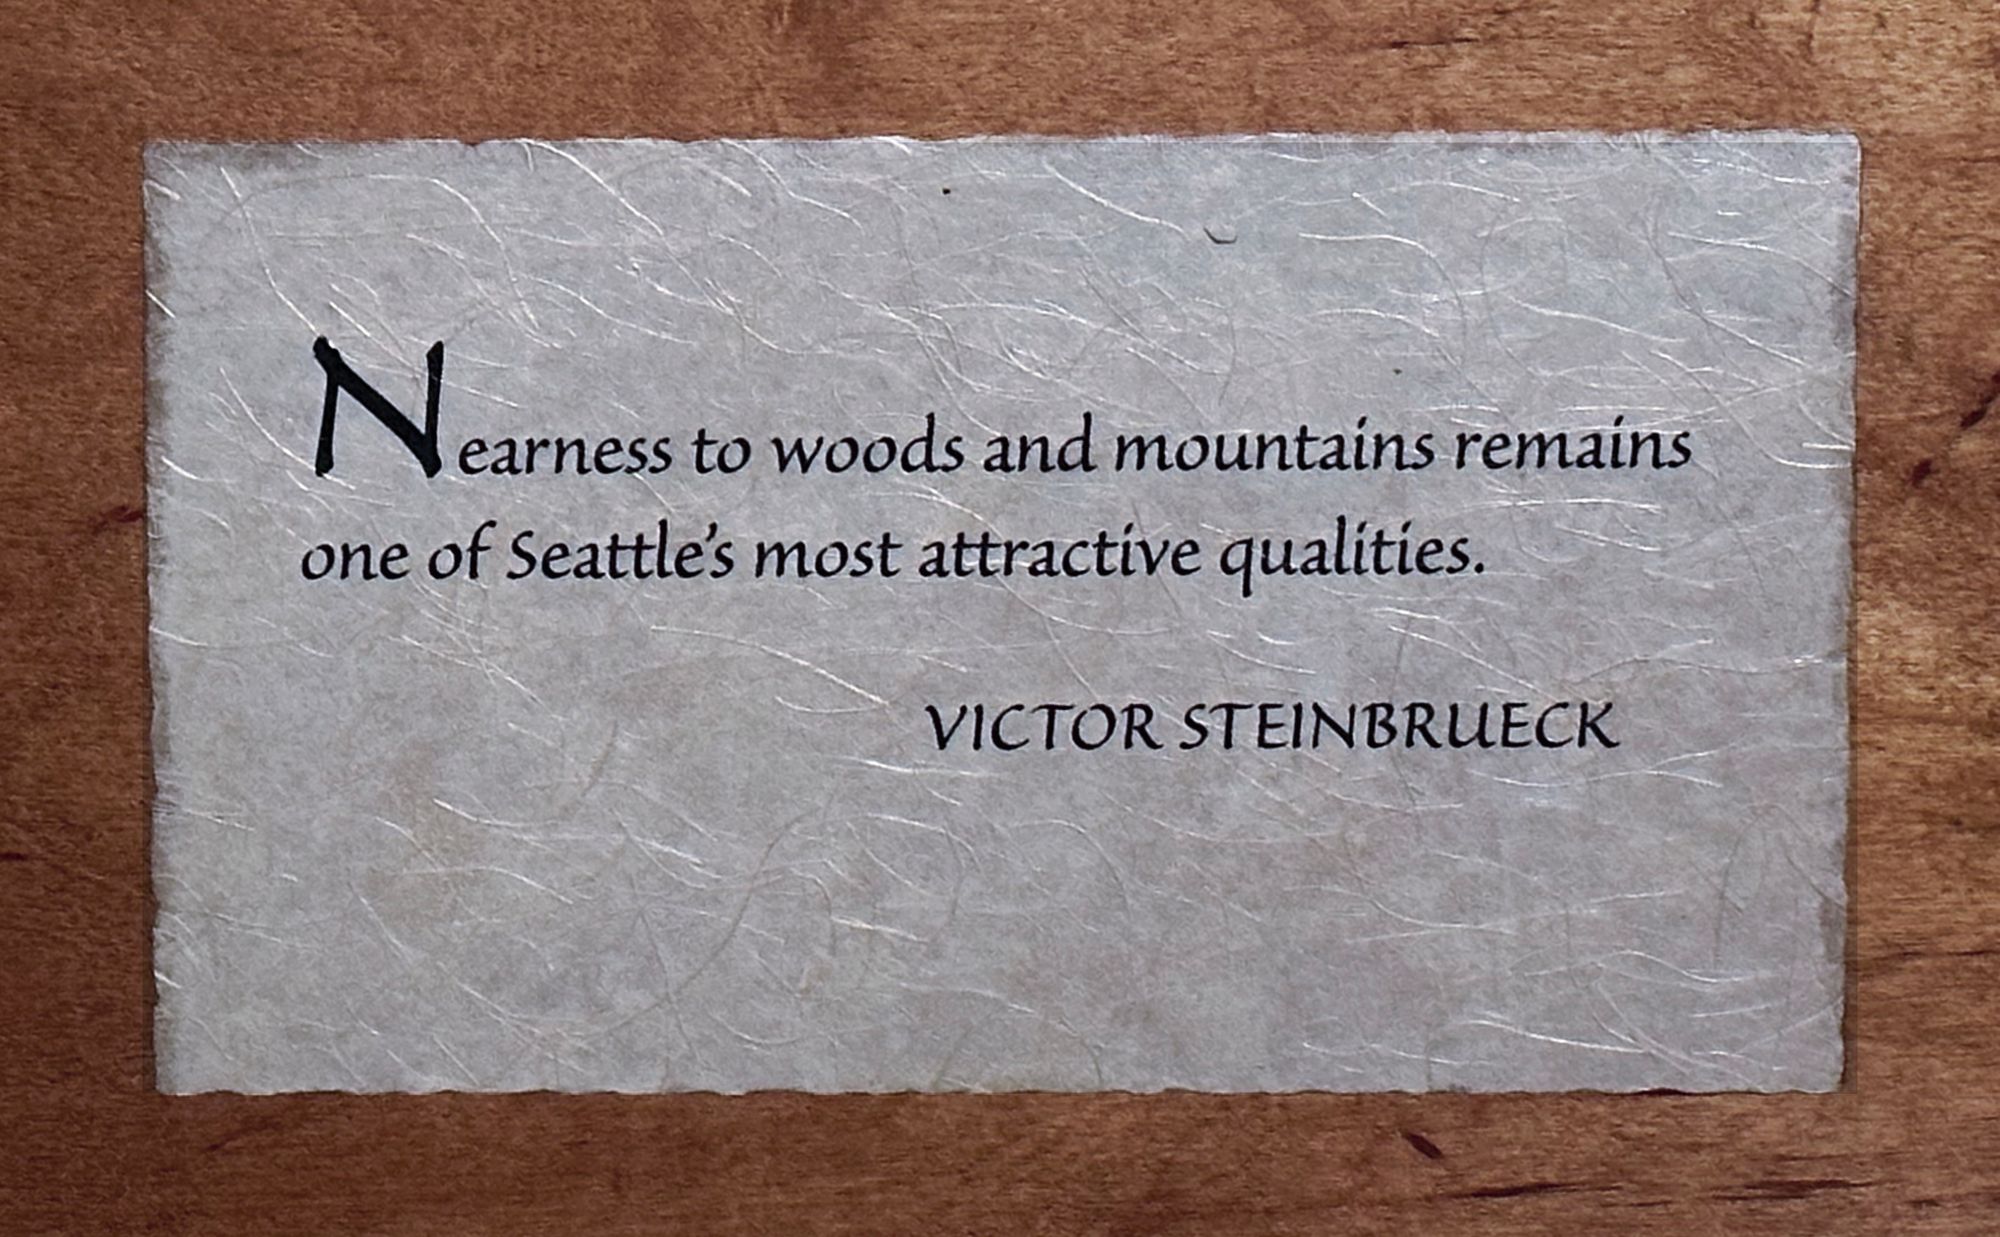 Photo of wooden plaque with Victor Steinbrueck quote: “Nearness to woods and mountains remains one of Seattle’s most attractive qualities.”